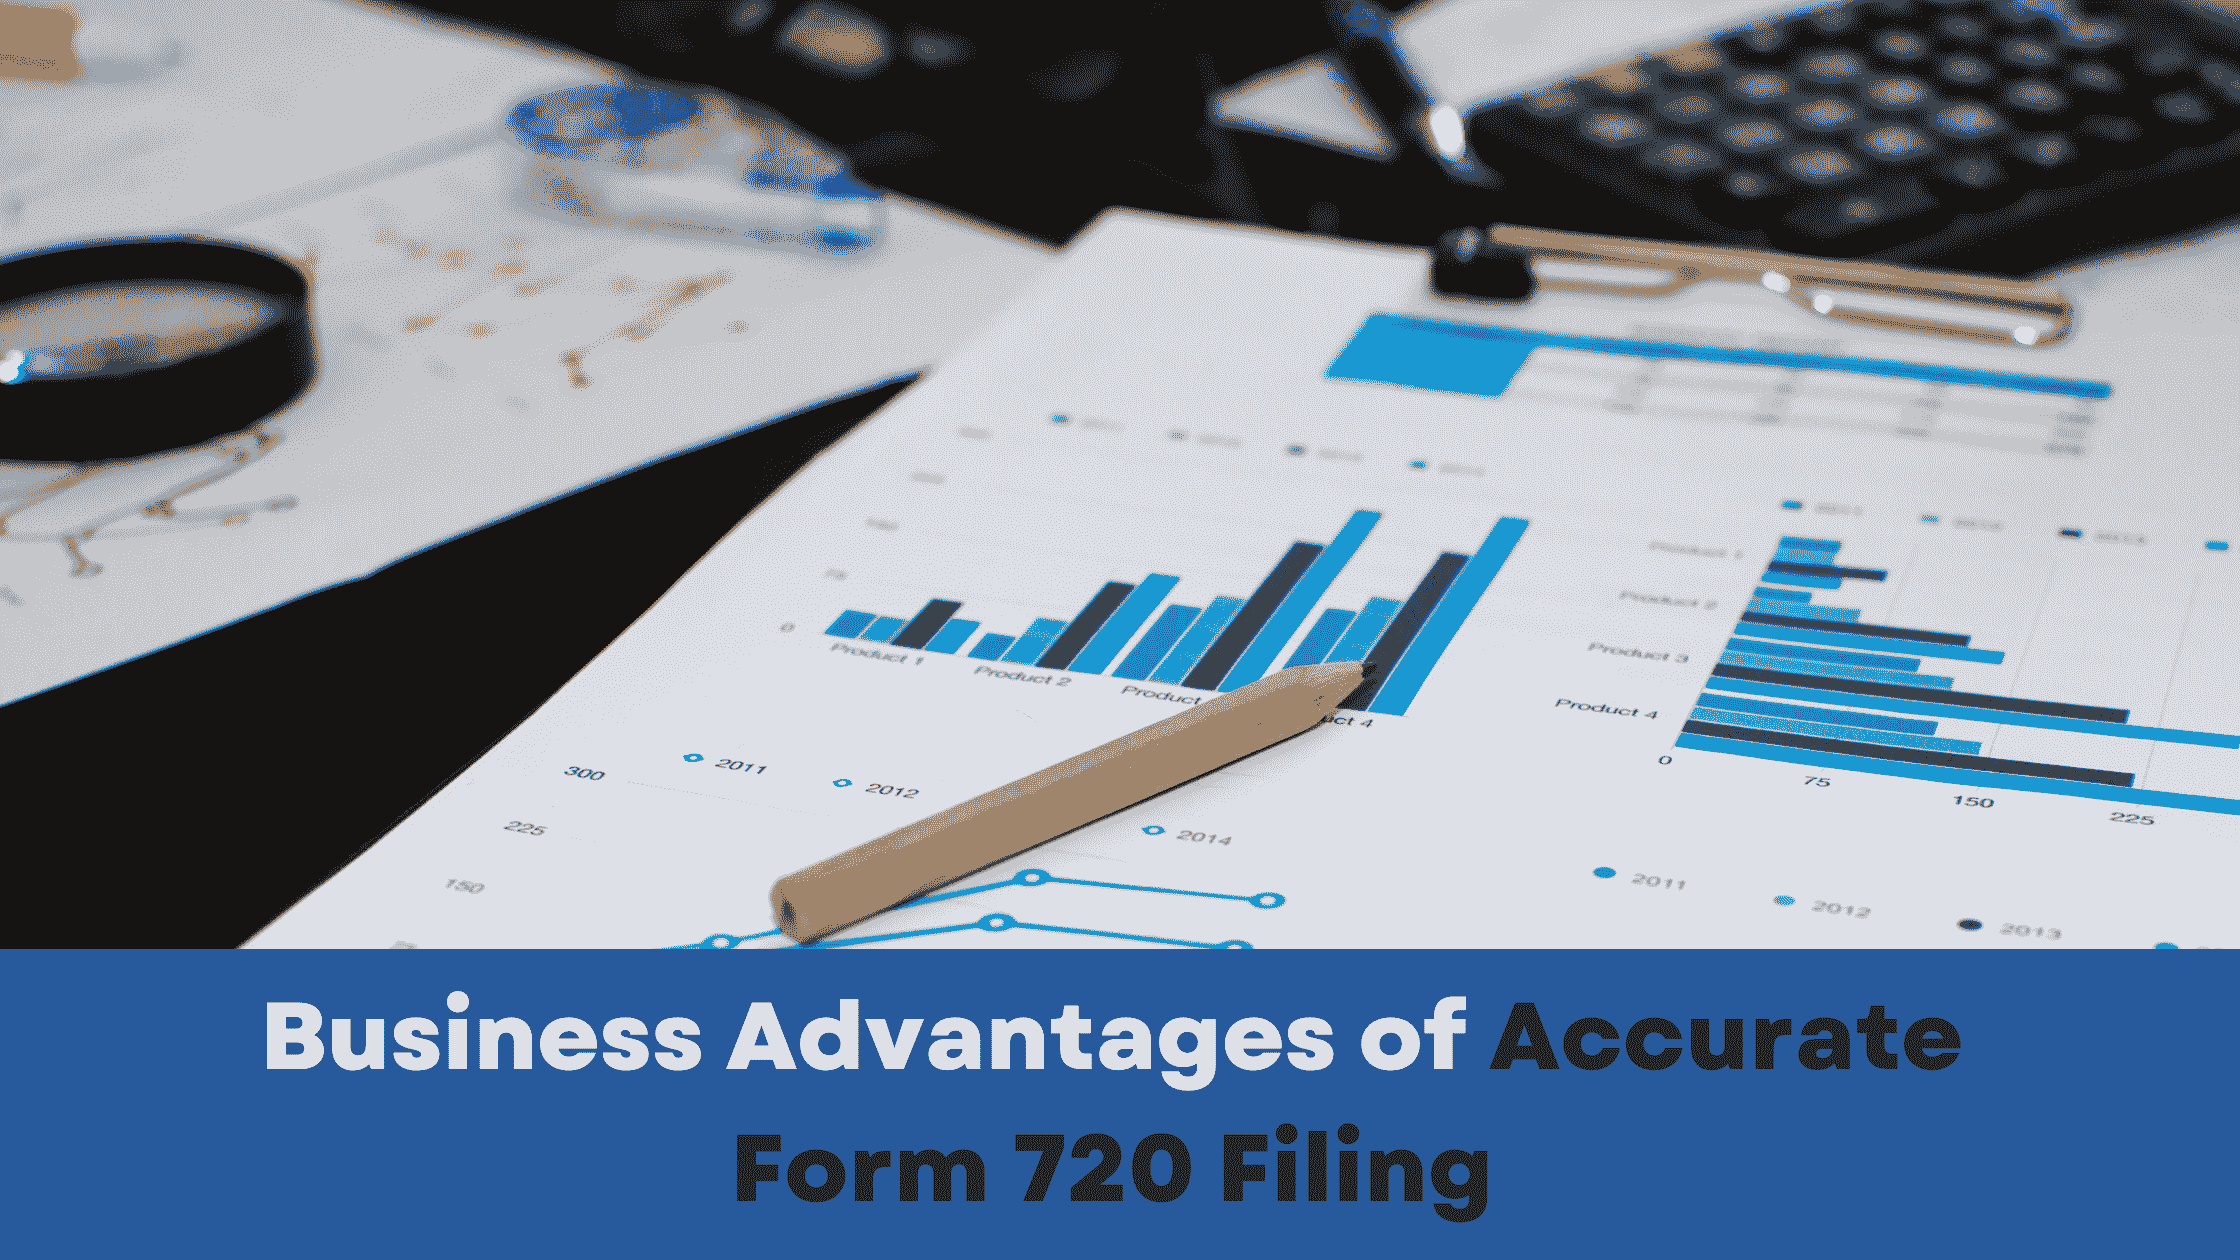 Business Advantages of Accurate Form 720 Filing